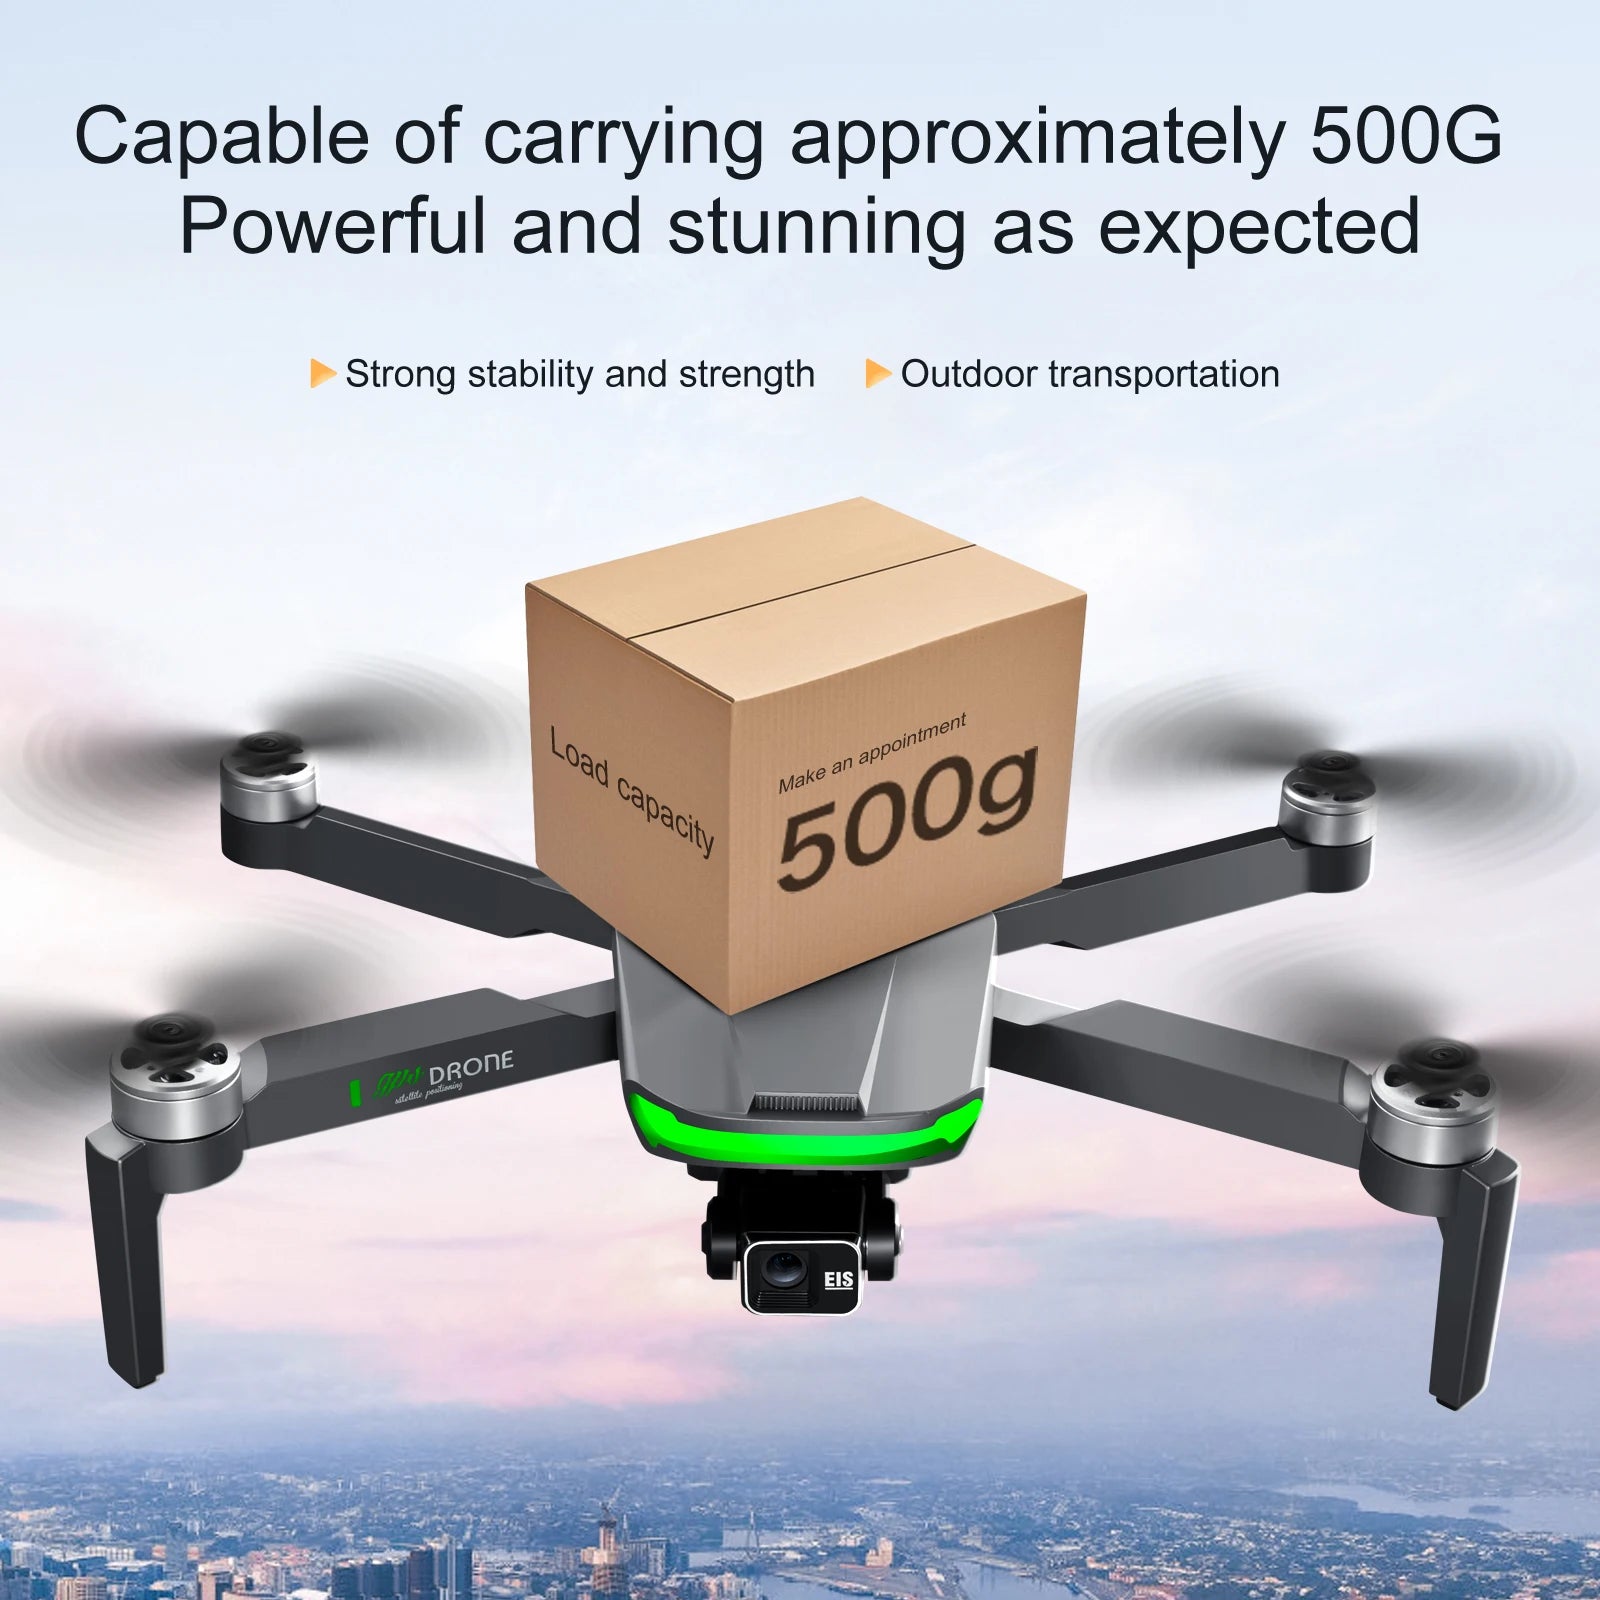 S155 Pro GPS Drone, Capable of carrying approximately 500G Powerful and stunning as expected Strong stability and strength Outdoor transportation